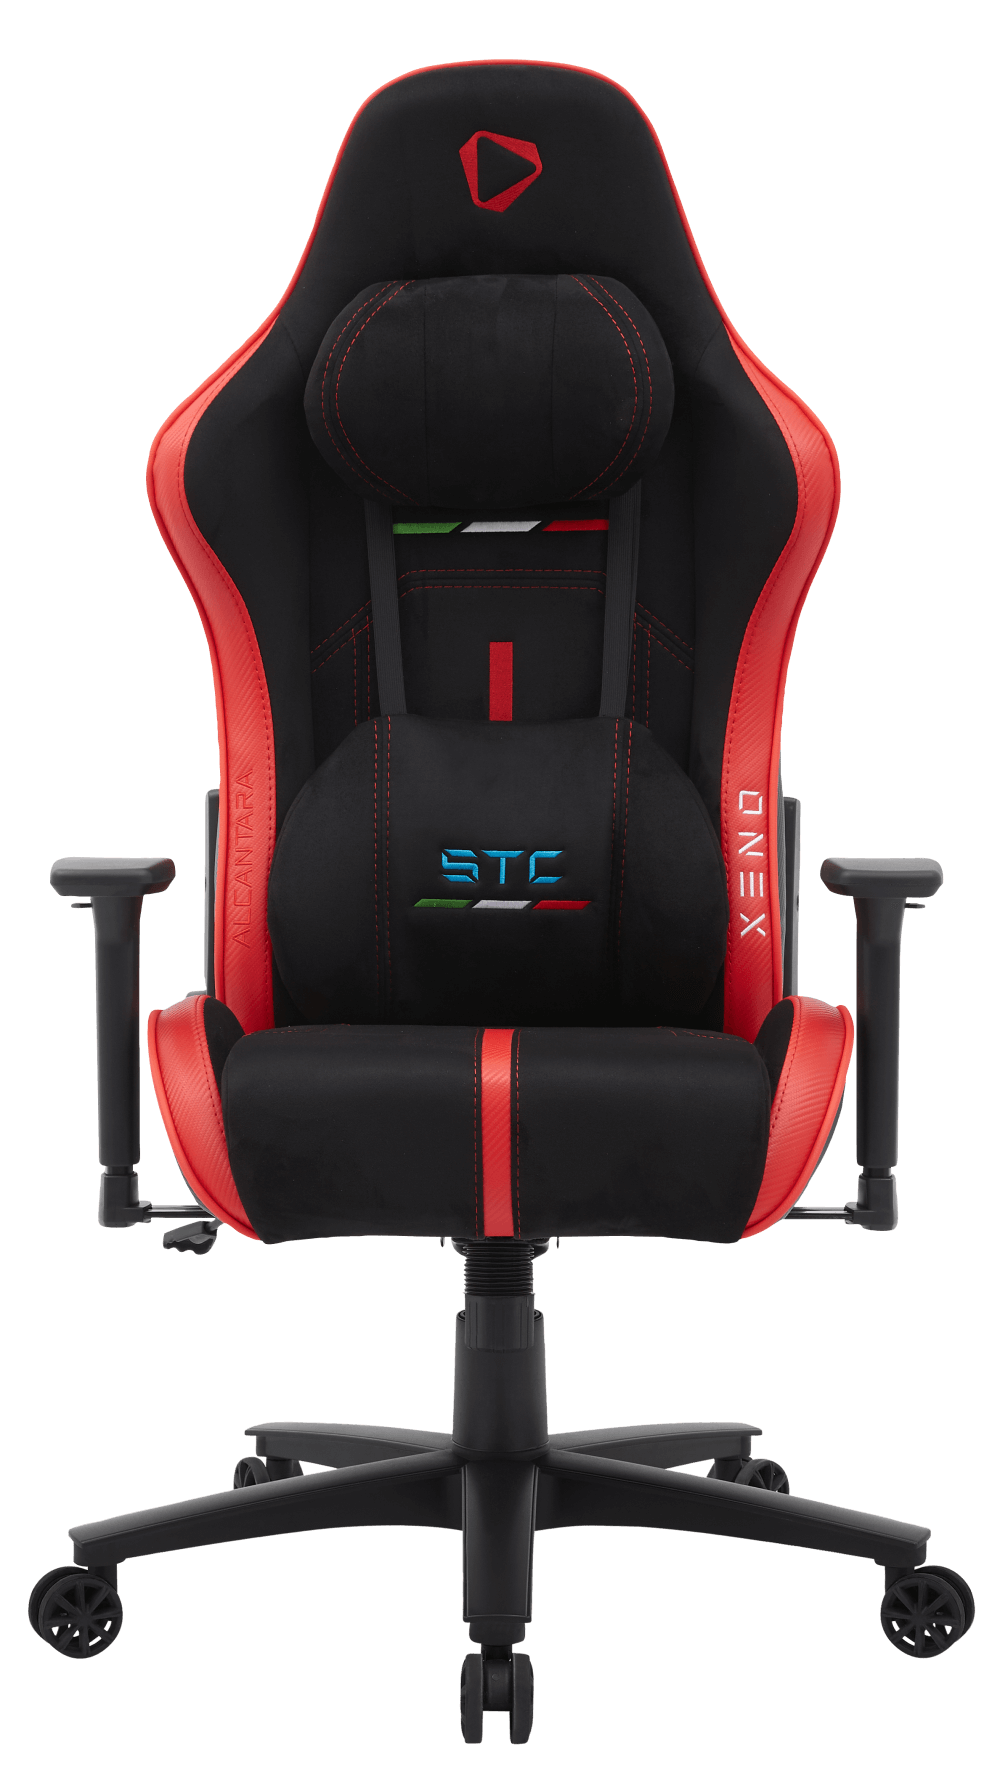  ONEX-STC ALCANTARA Gaming /Office Chair - Black/Red<BR><fONT COLOR='RED'>In-Store Pickup Not Available - Delivery Only (Freight Charges Apply)  